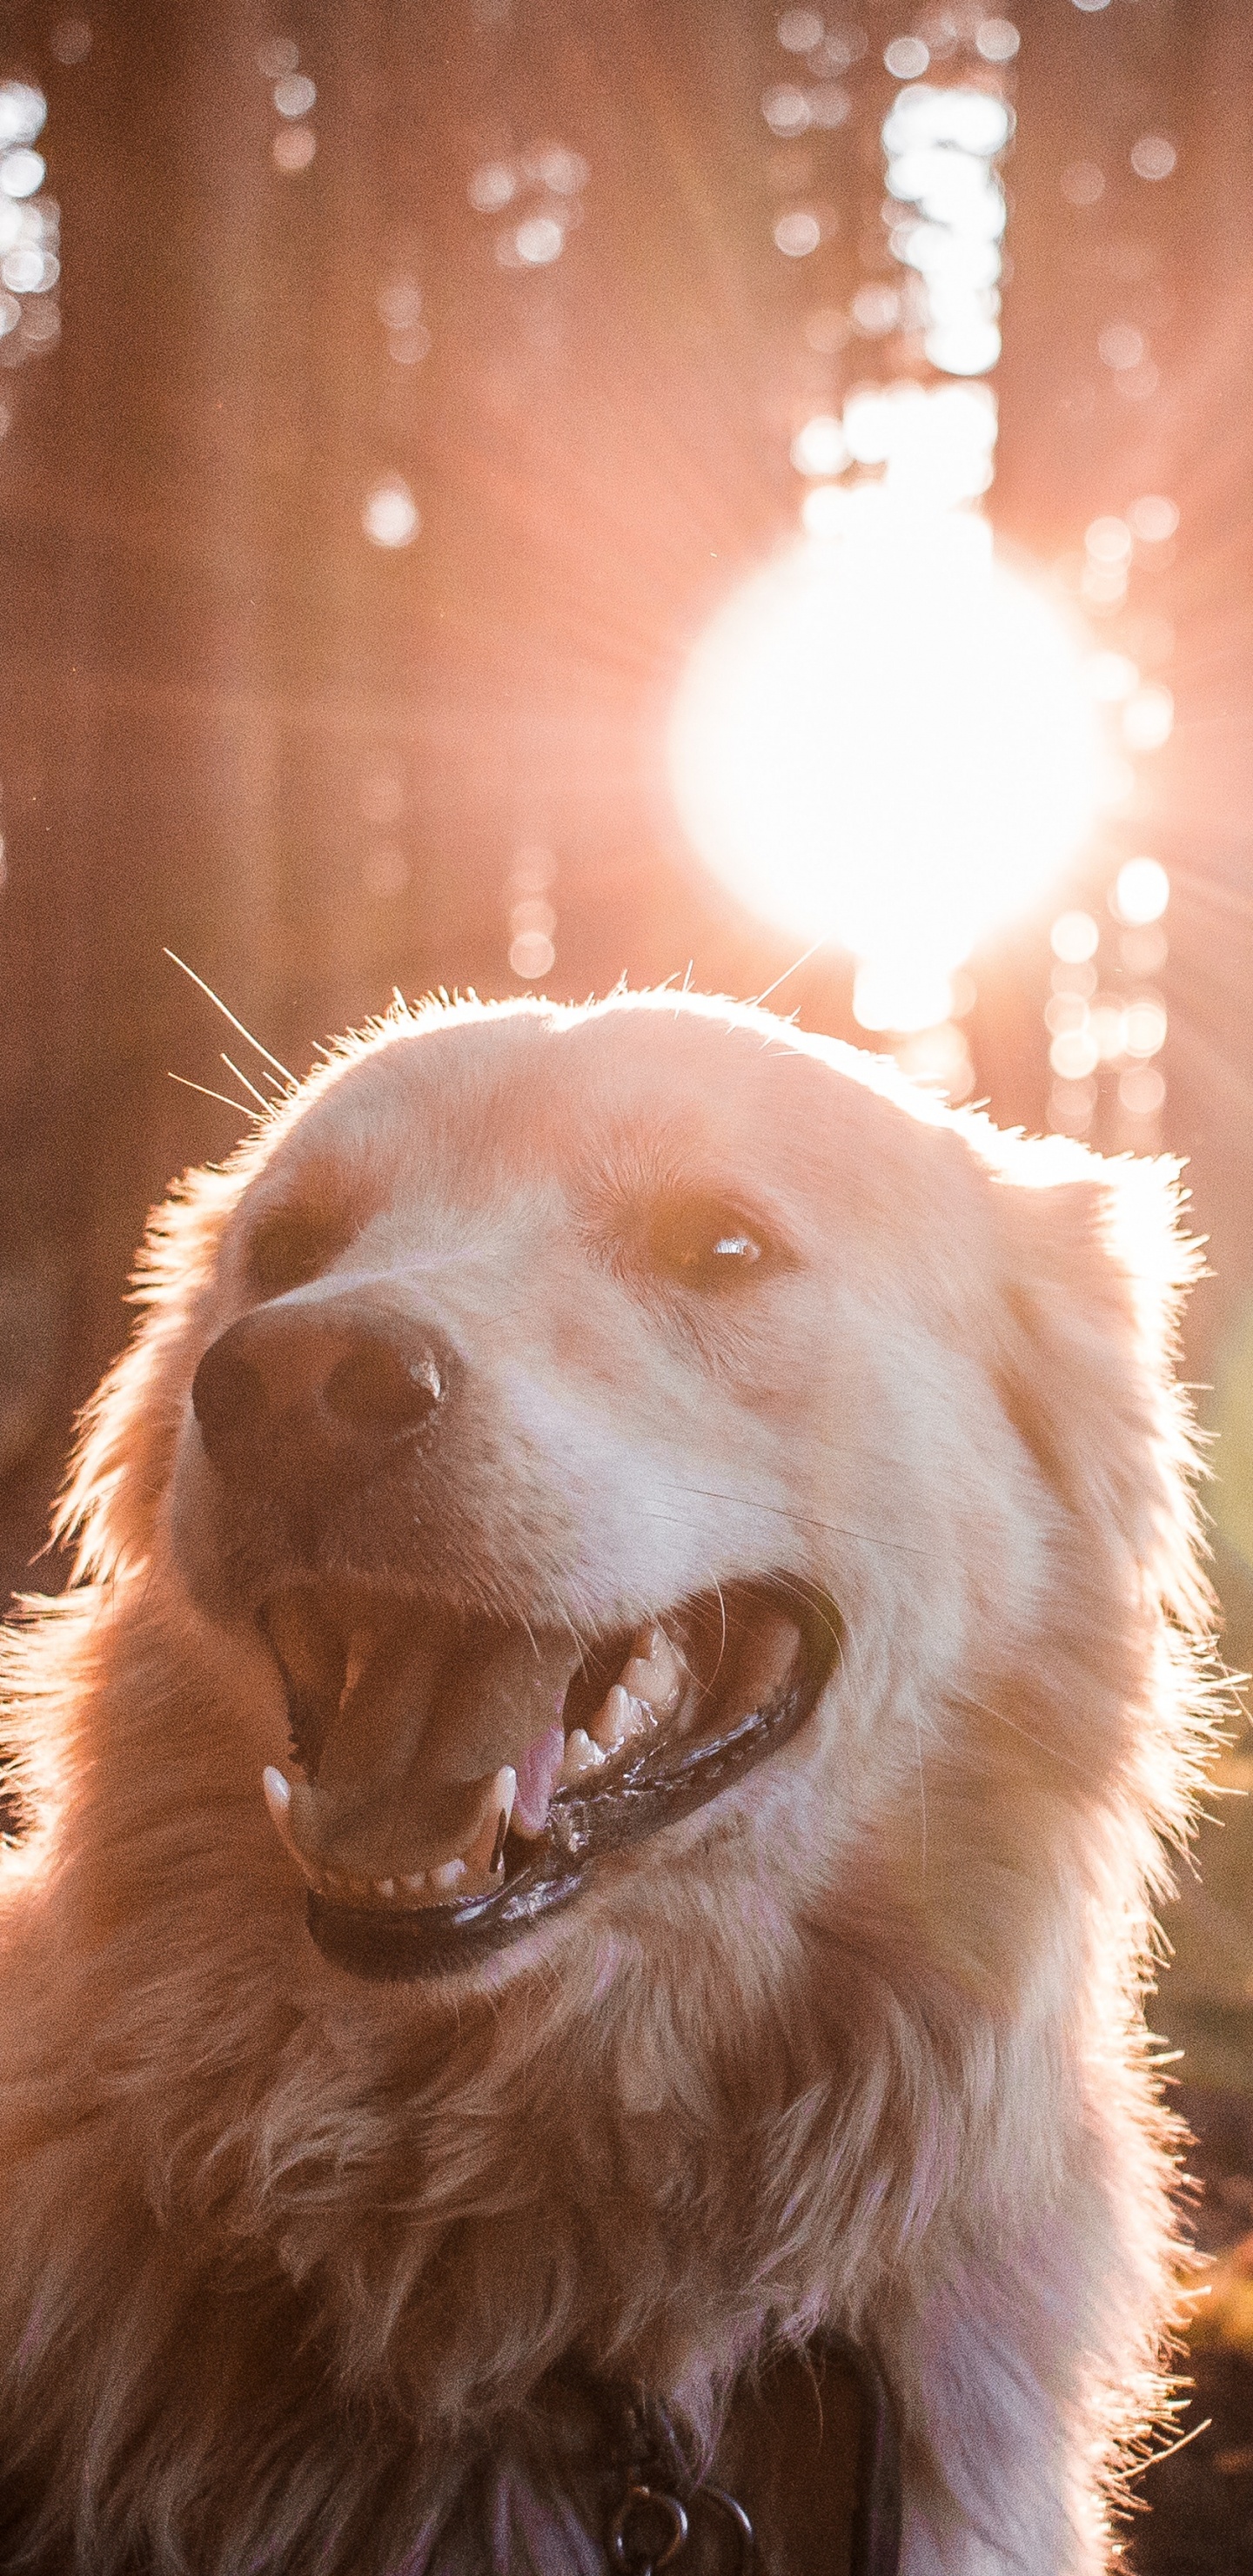 Golden Retriever With Yellow Ball on Mouth. Wallpaper in 1440x2960 Resolution